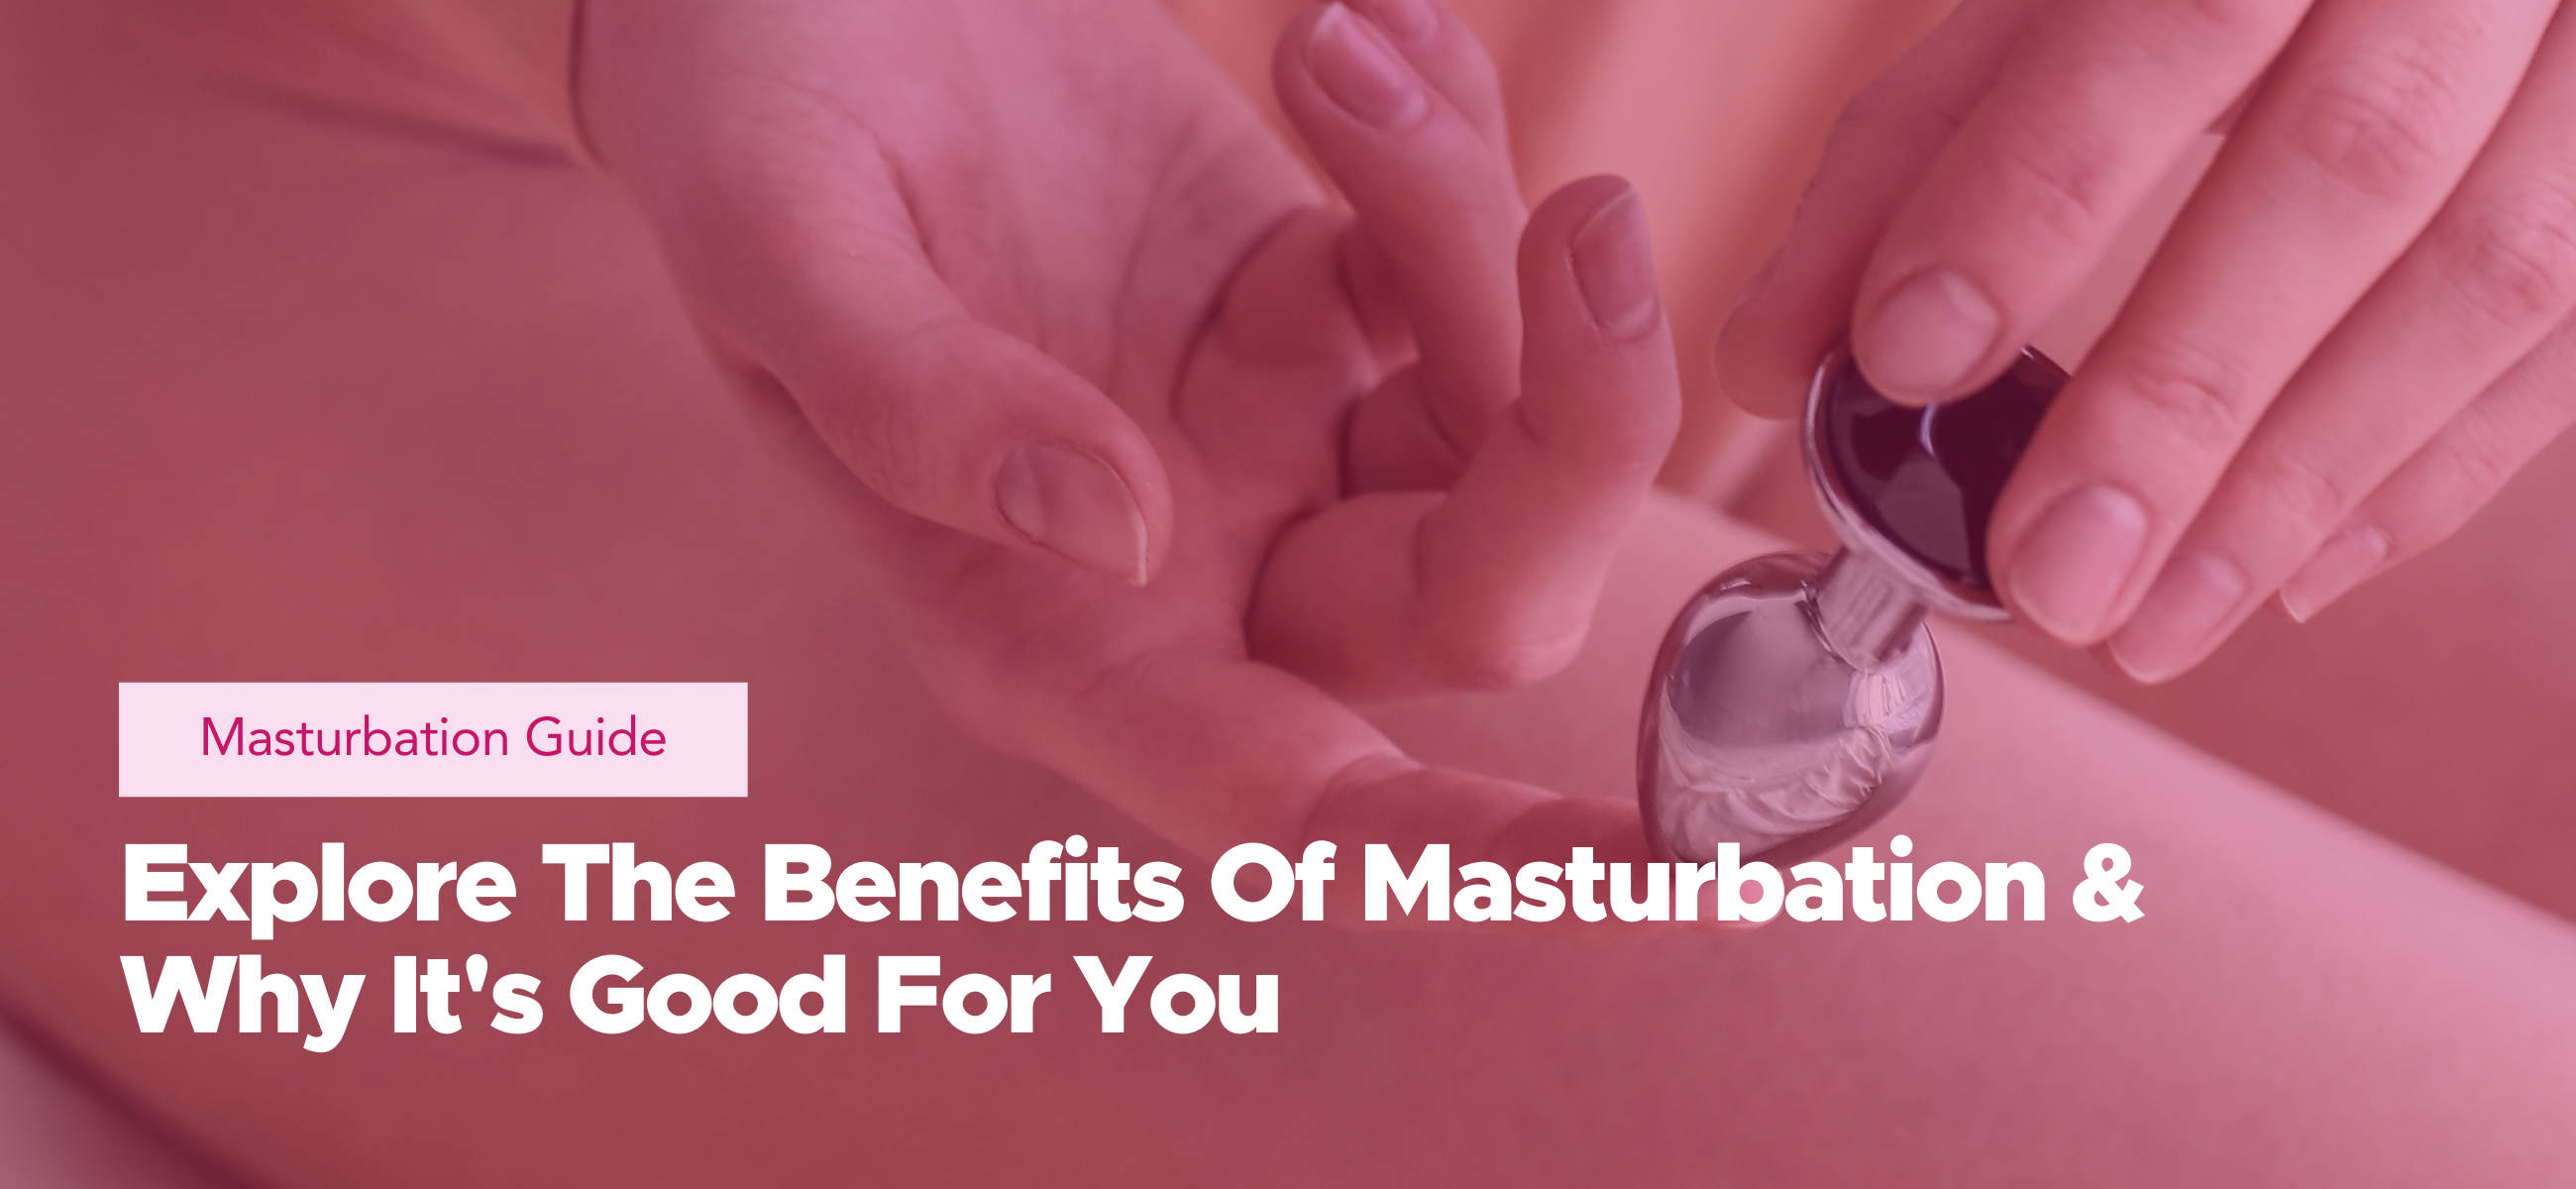 Explore the benefits of masturbation and why it's good for you in this masturbation guide.